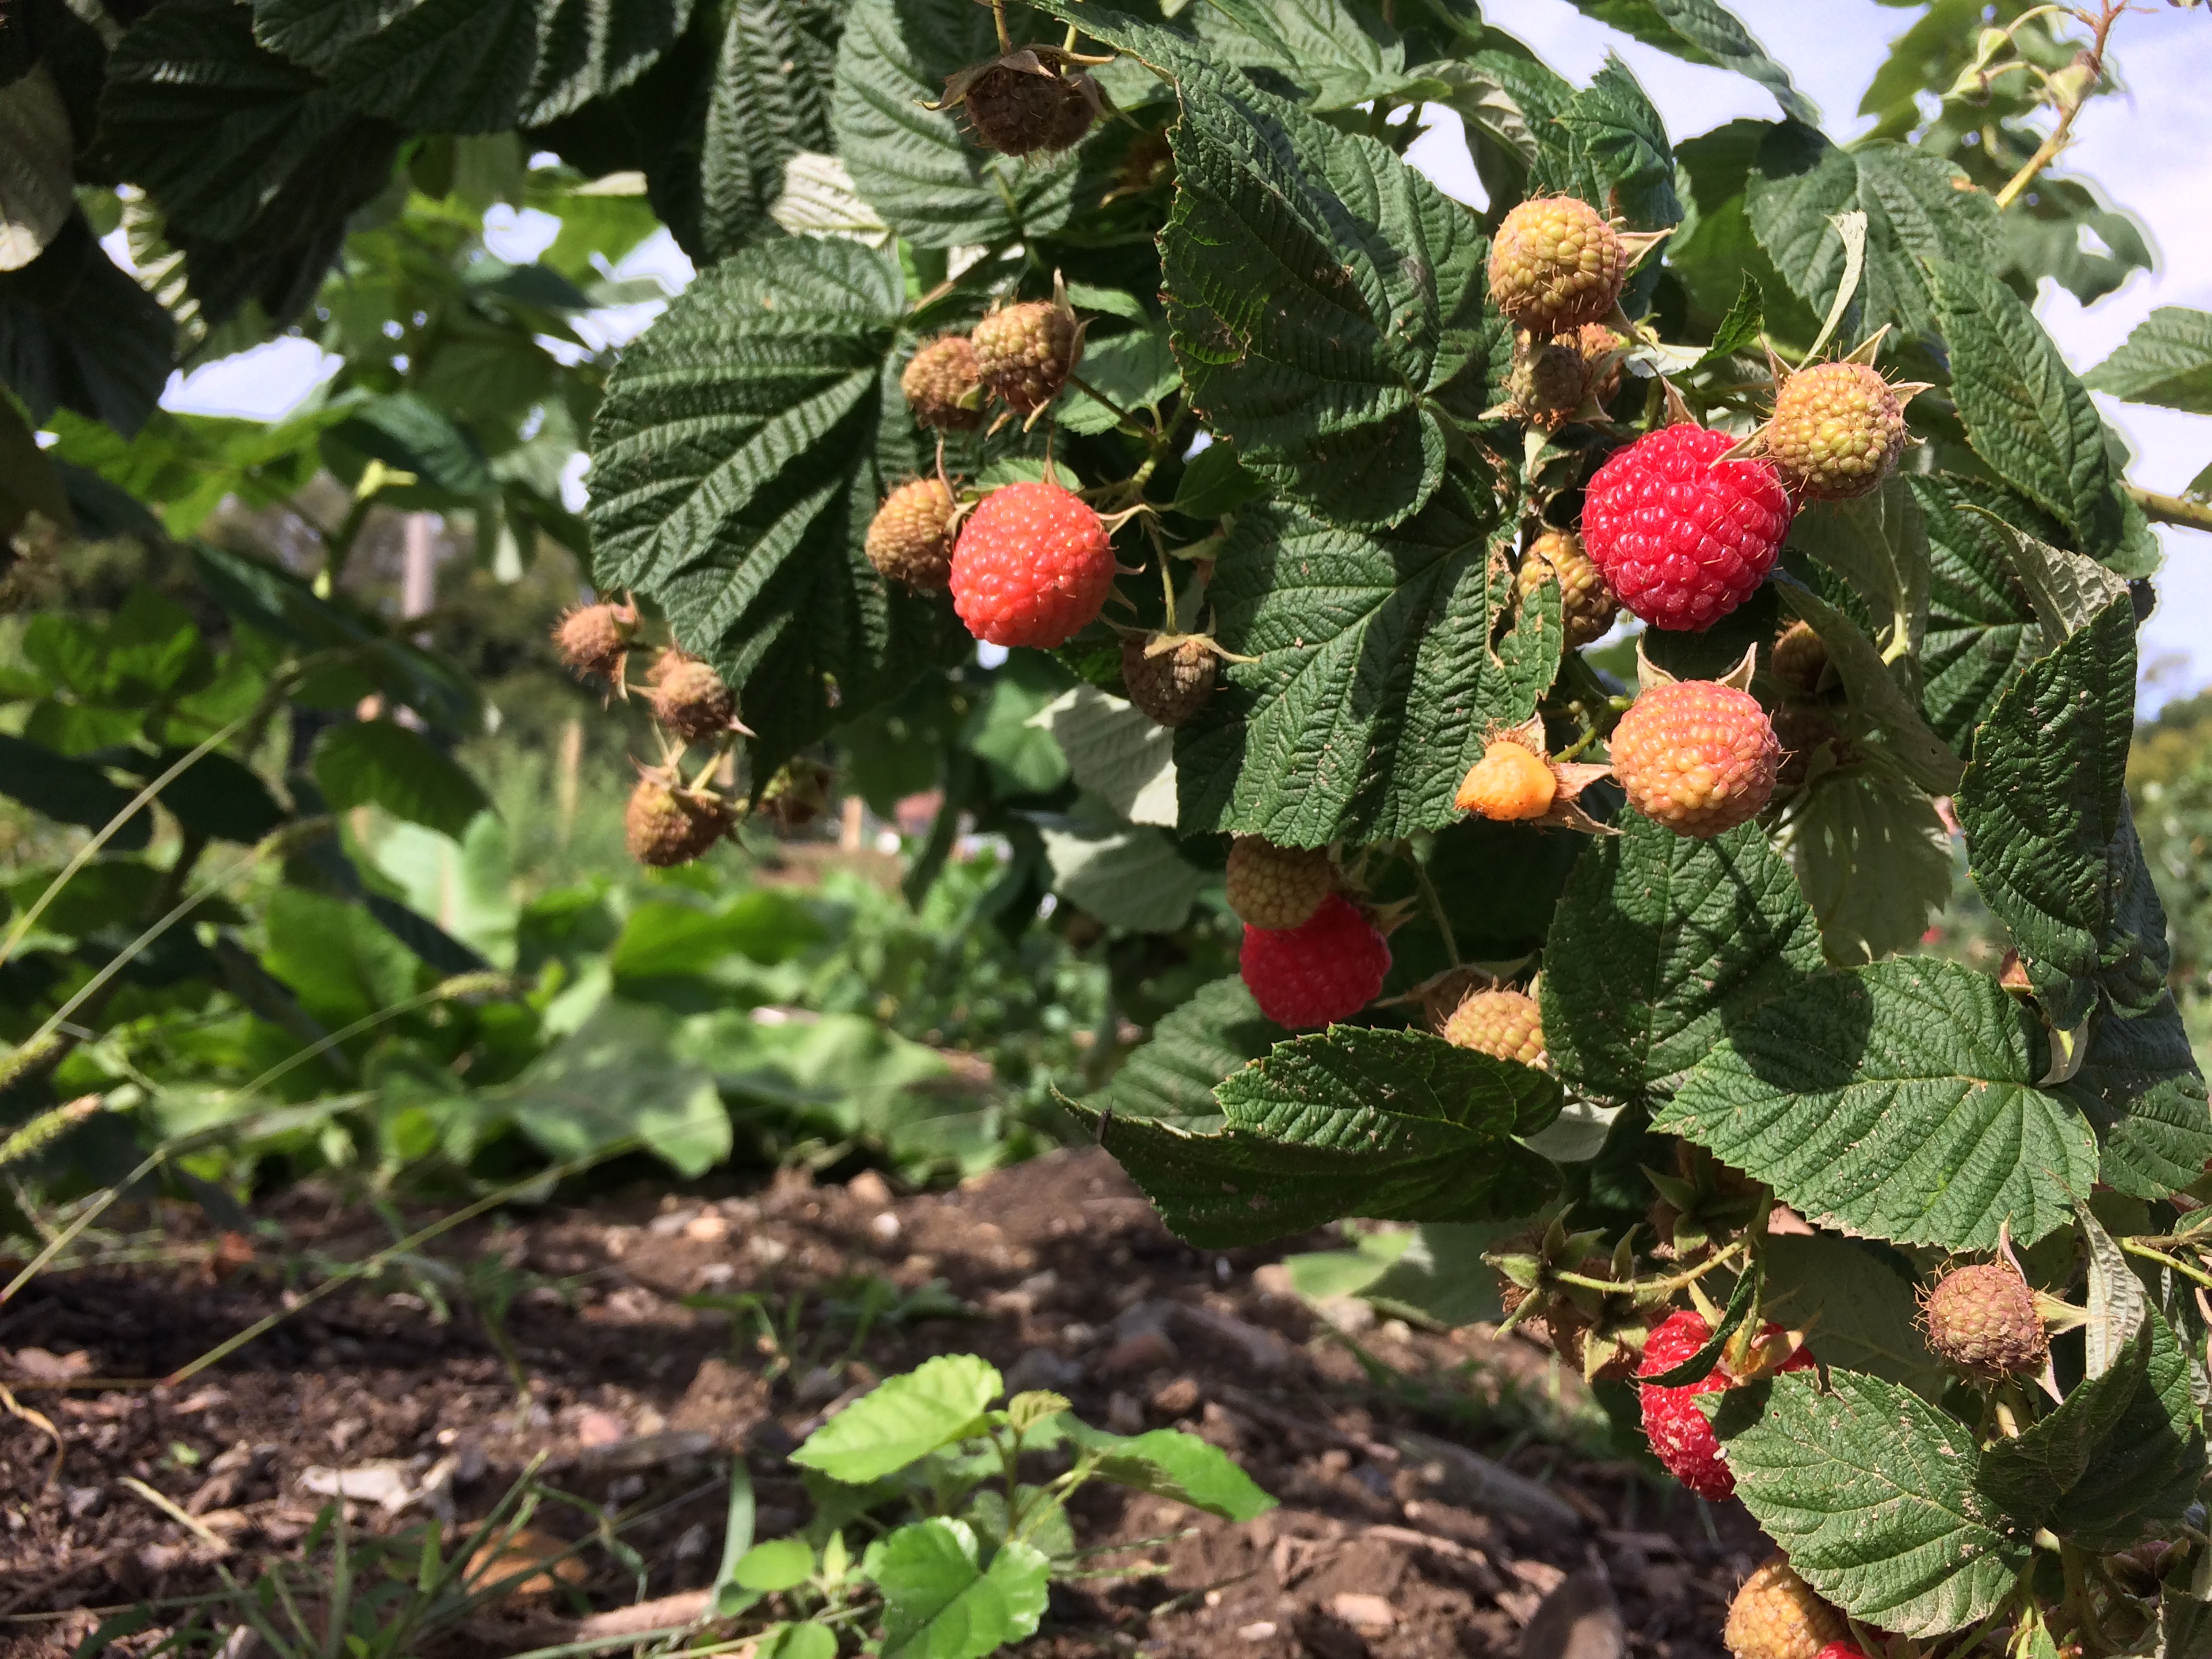 Ask an expert: Neighbor\'s spraying could affect growth, yield of raspberries